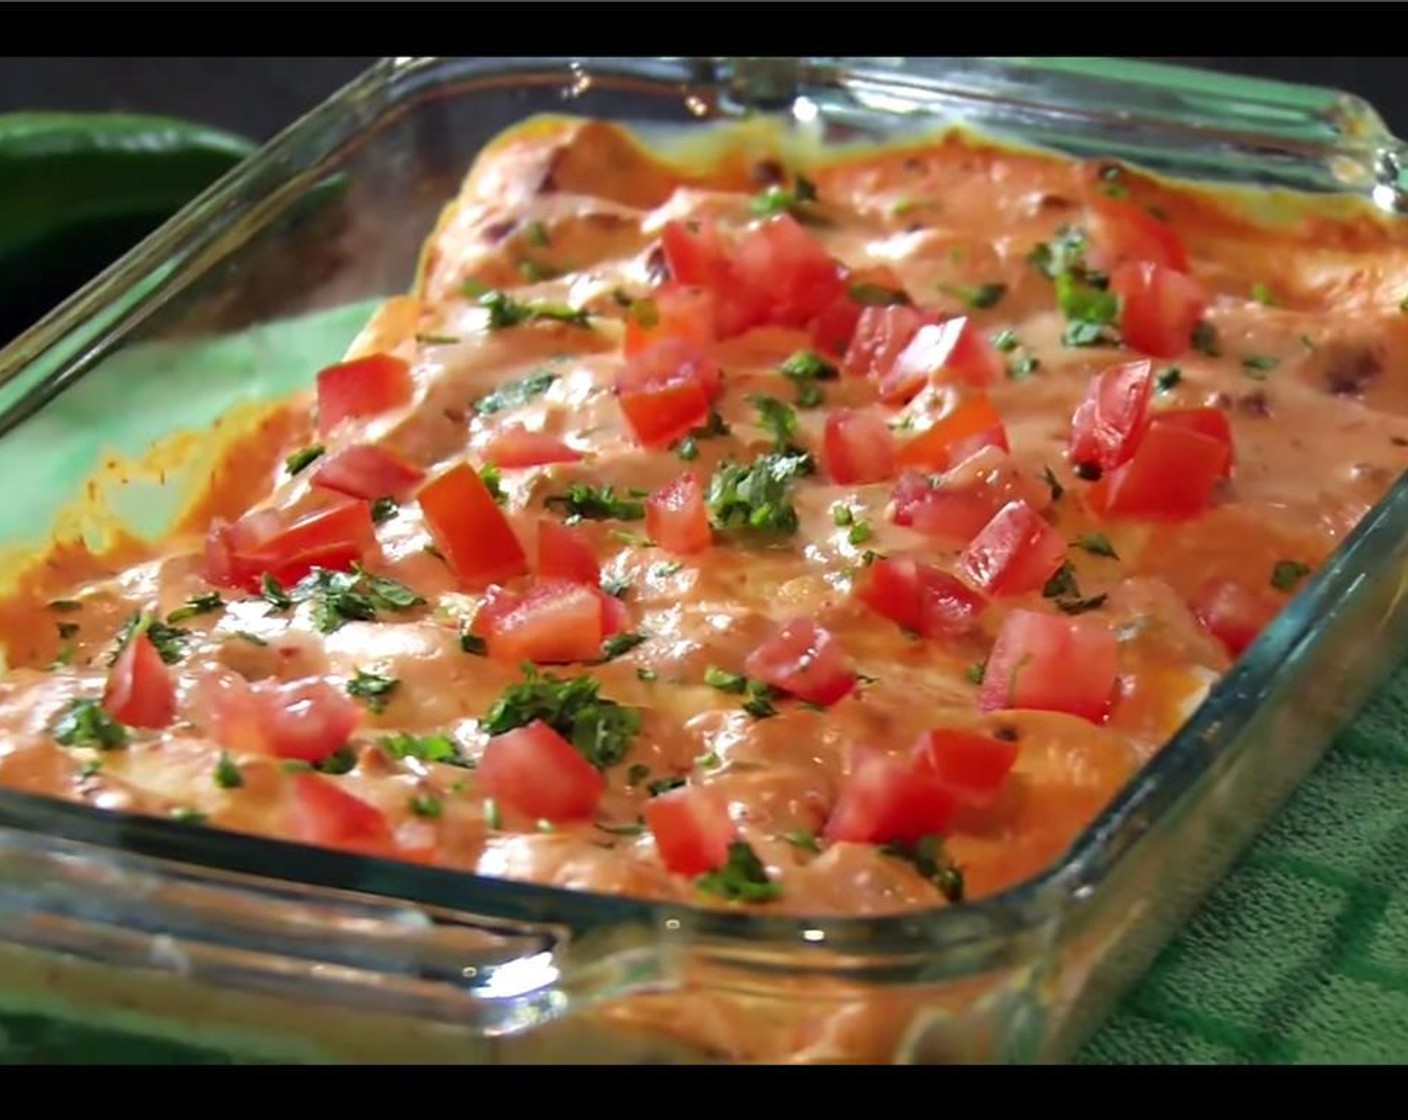 step 7 Top with the chopped Tomato (1) and Fresh Cilantro (to taste). Serve and enjoy.